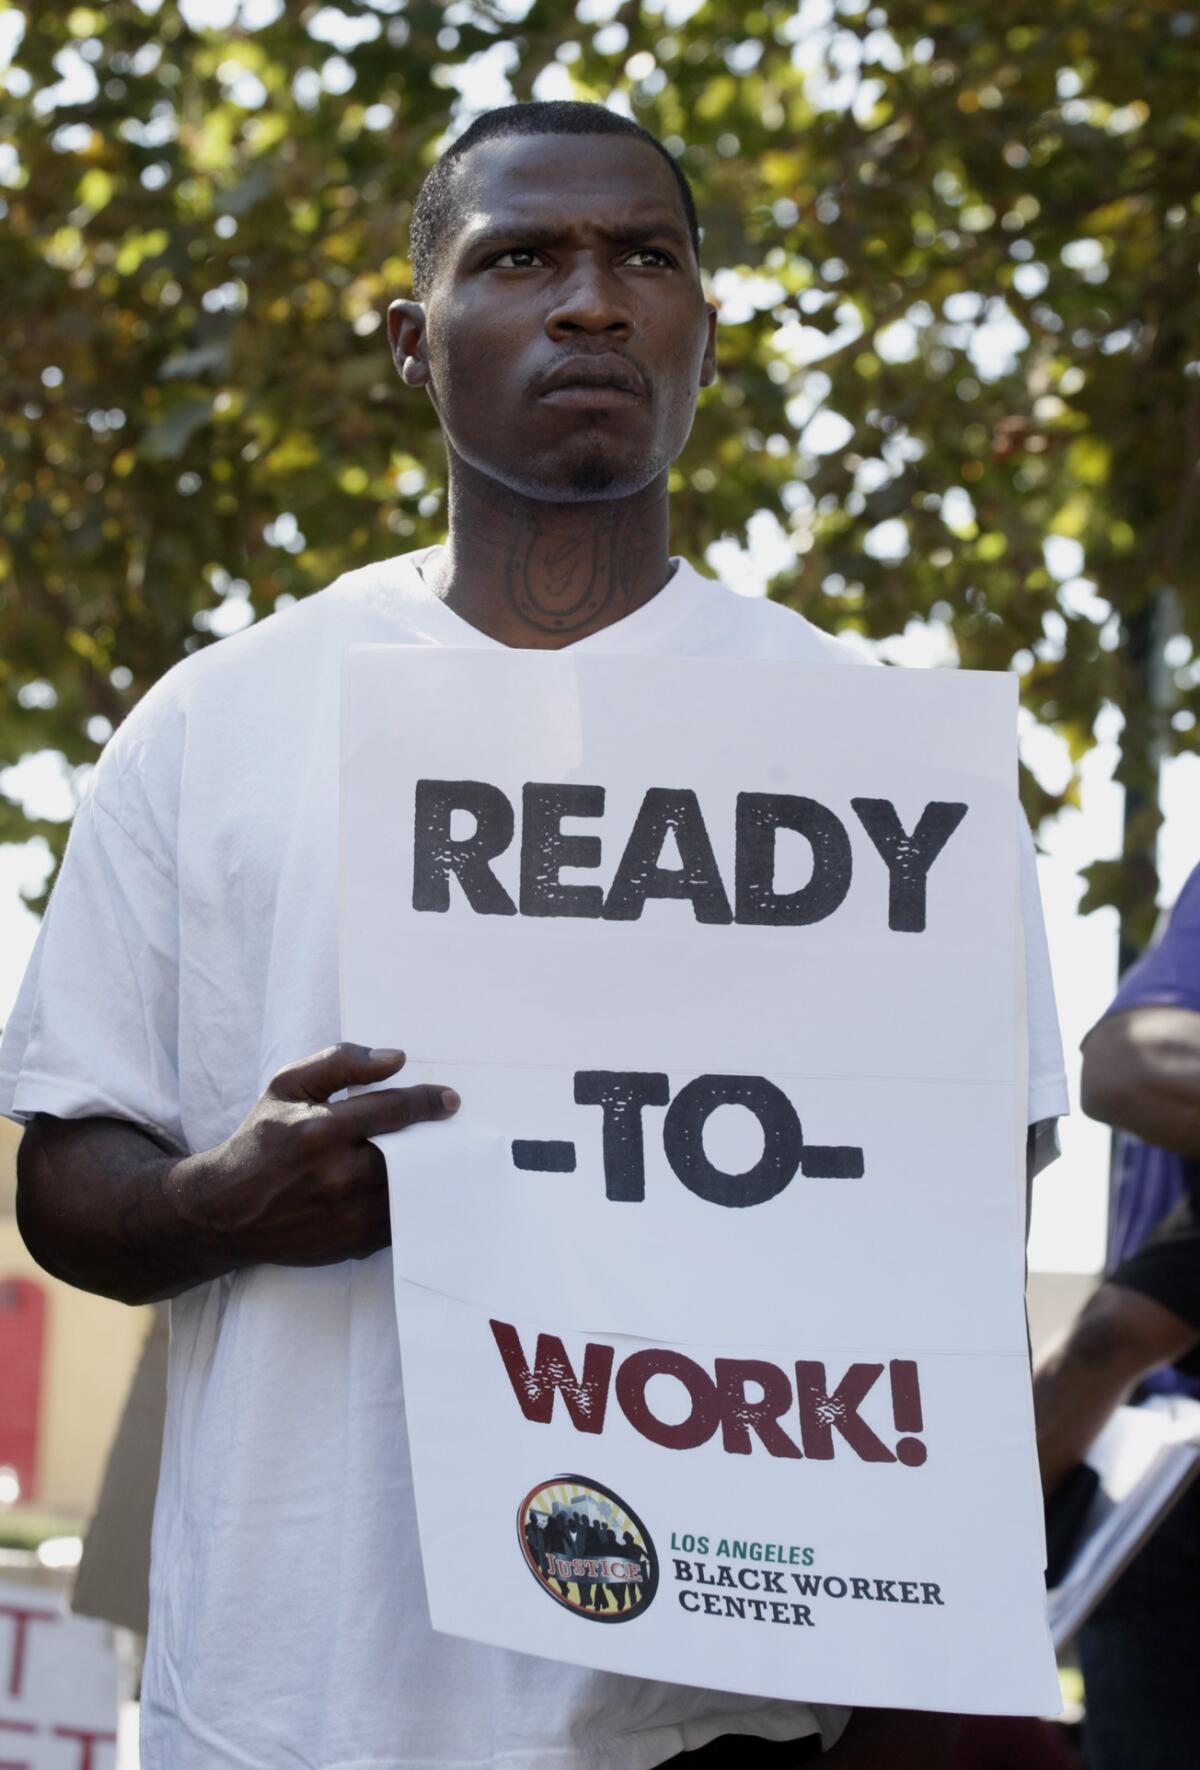 Arthur Gosey participates in a "ready to work" rally held by the Los Angeles Black Worker Center last year at Leimert Park. A new report released Thursday pointed out that blacks were falling behind whites and Latinos when it came to employment and income.